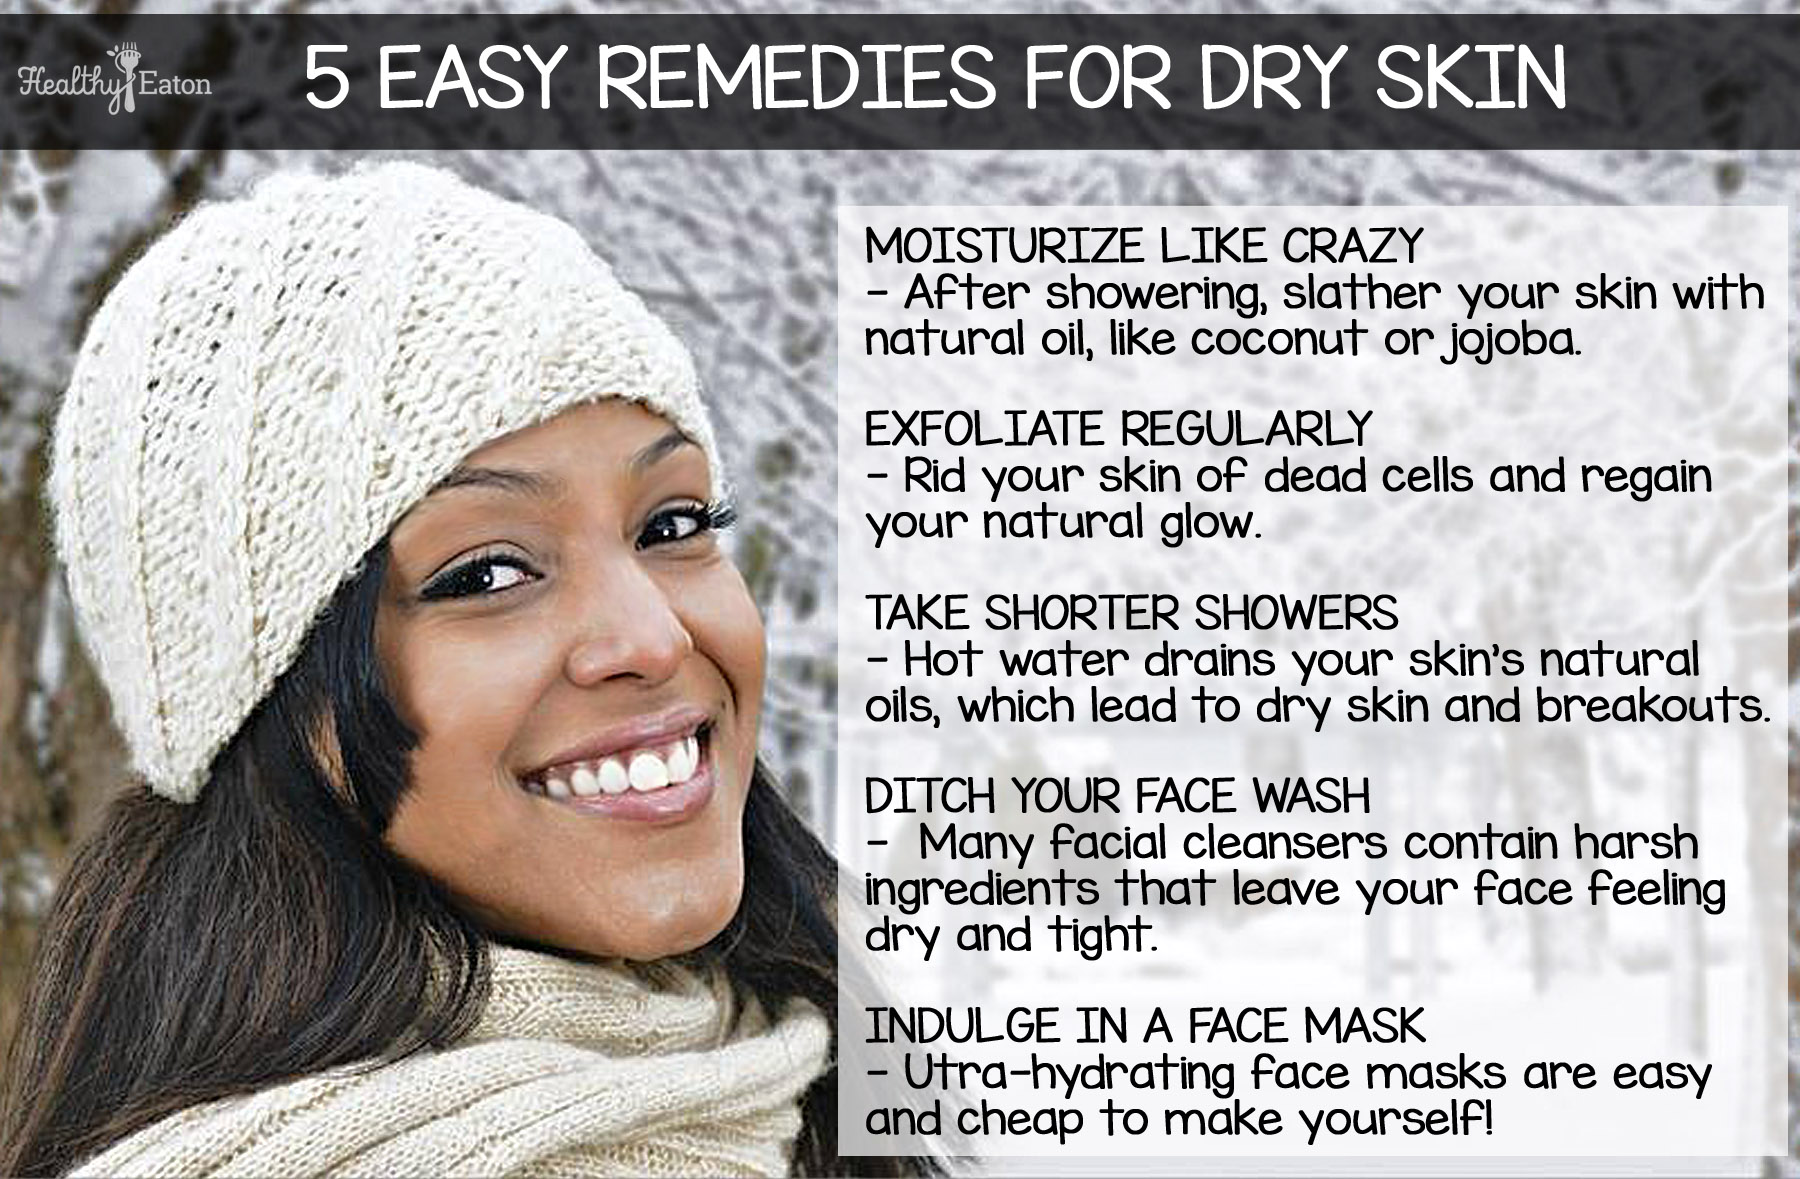 5 Easy Remedies for Dry Skin